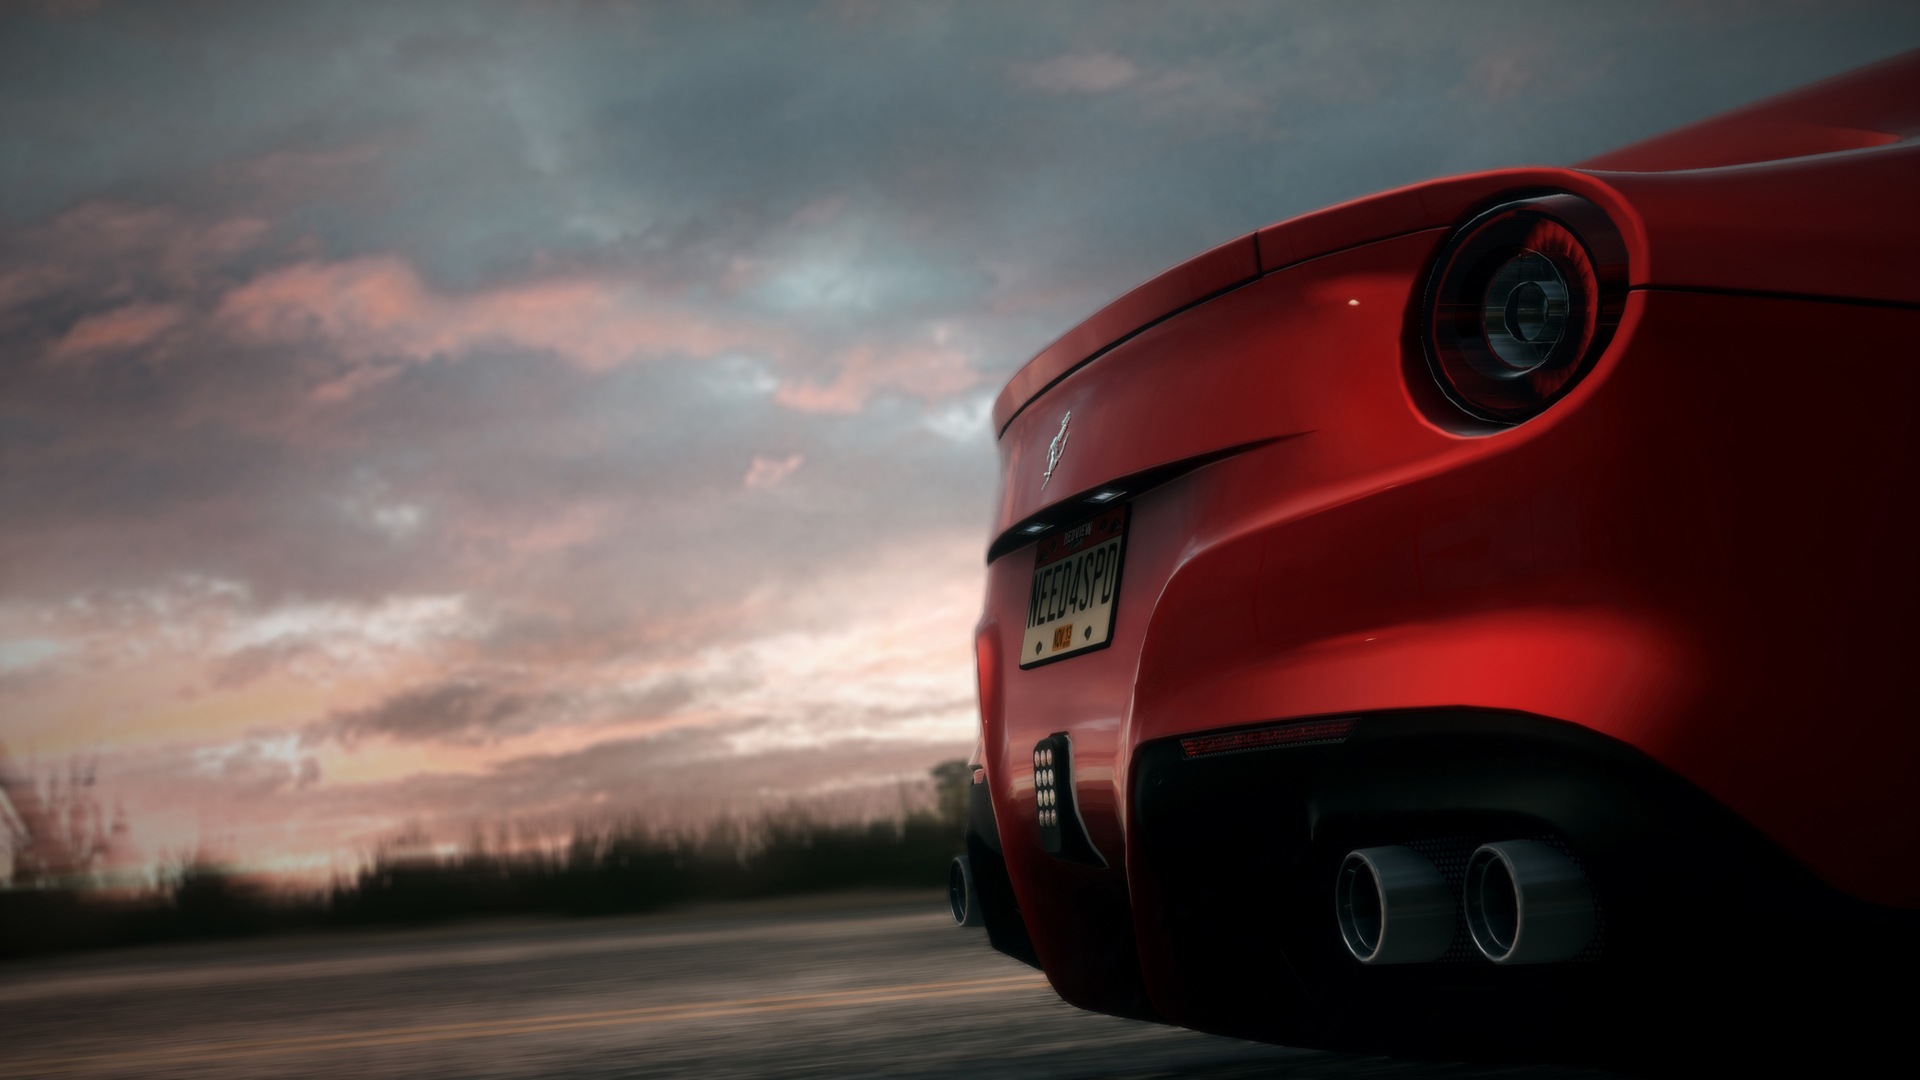 Need for Speed: Rivals HD Wallpaper #3 - 1920x1080